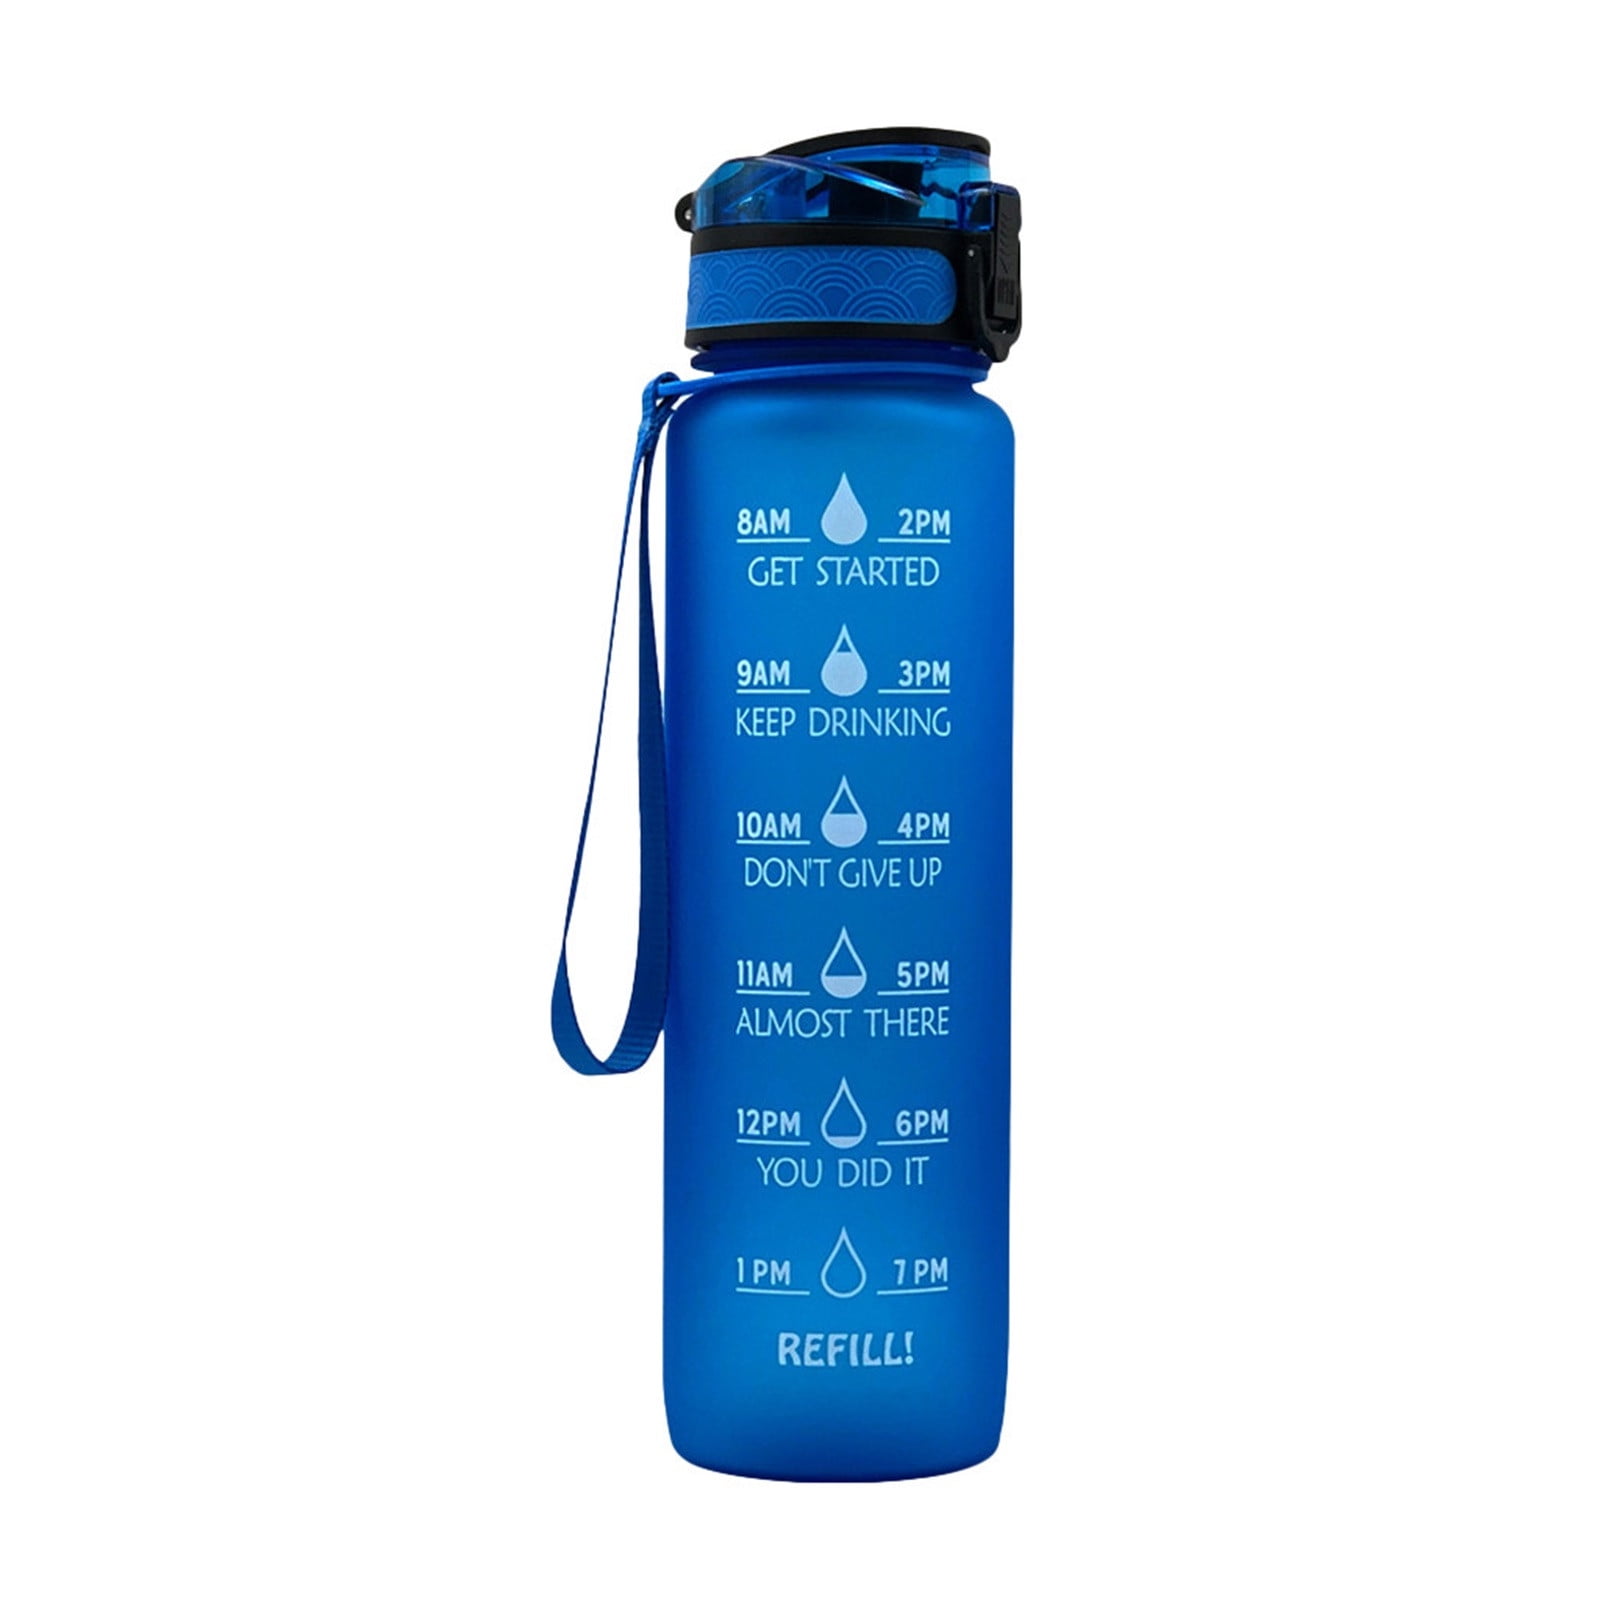 Wor-Wic 24 oz. Frosted Water Bottle